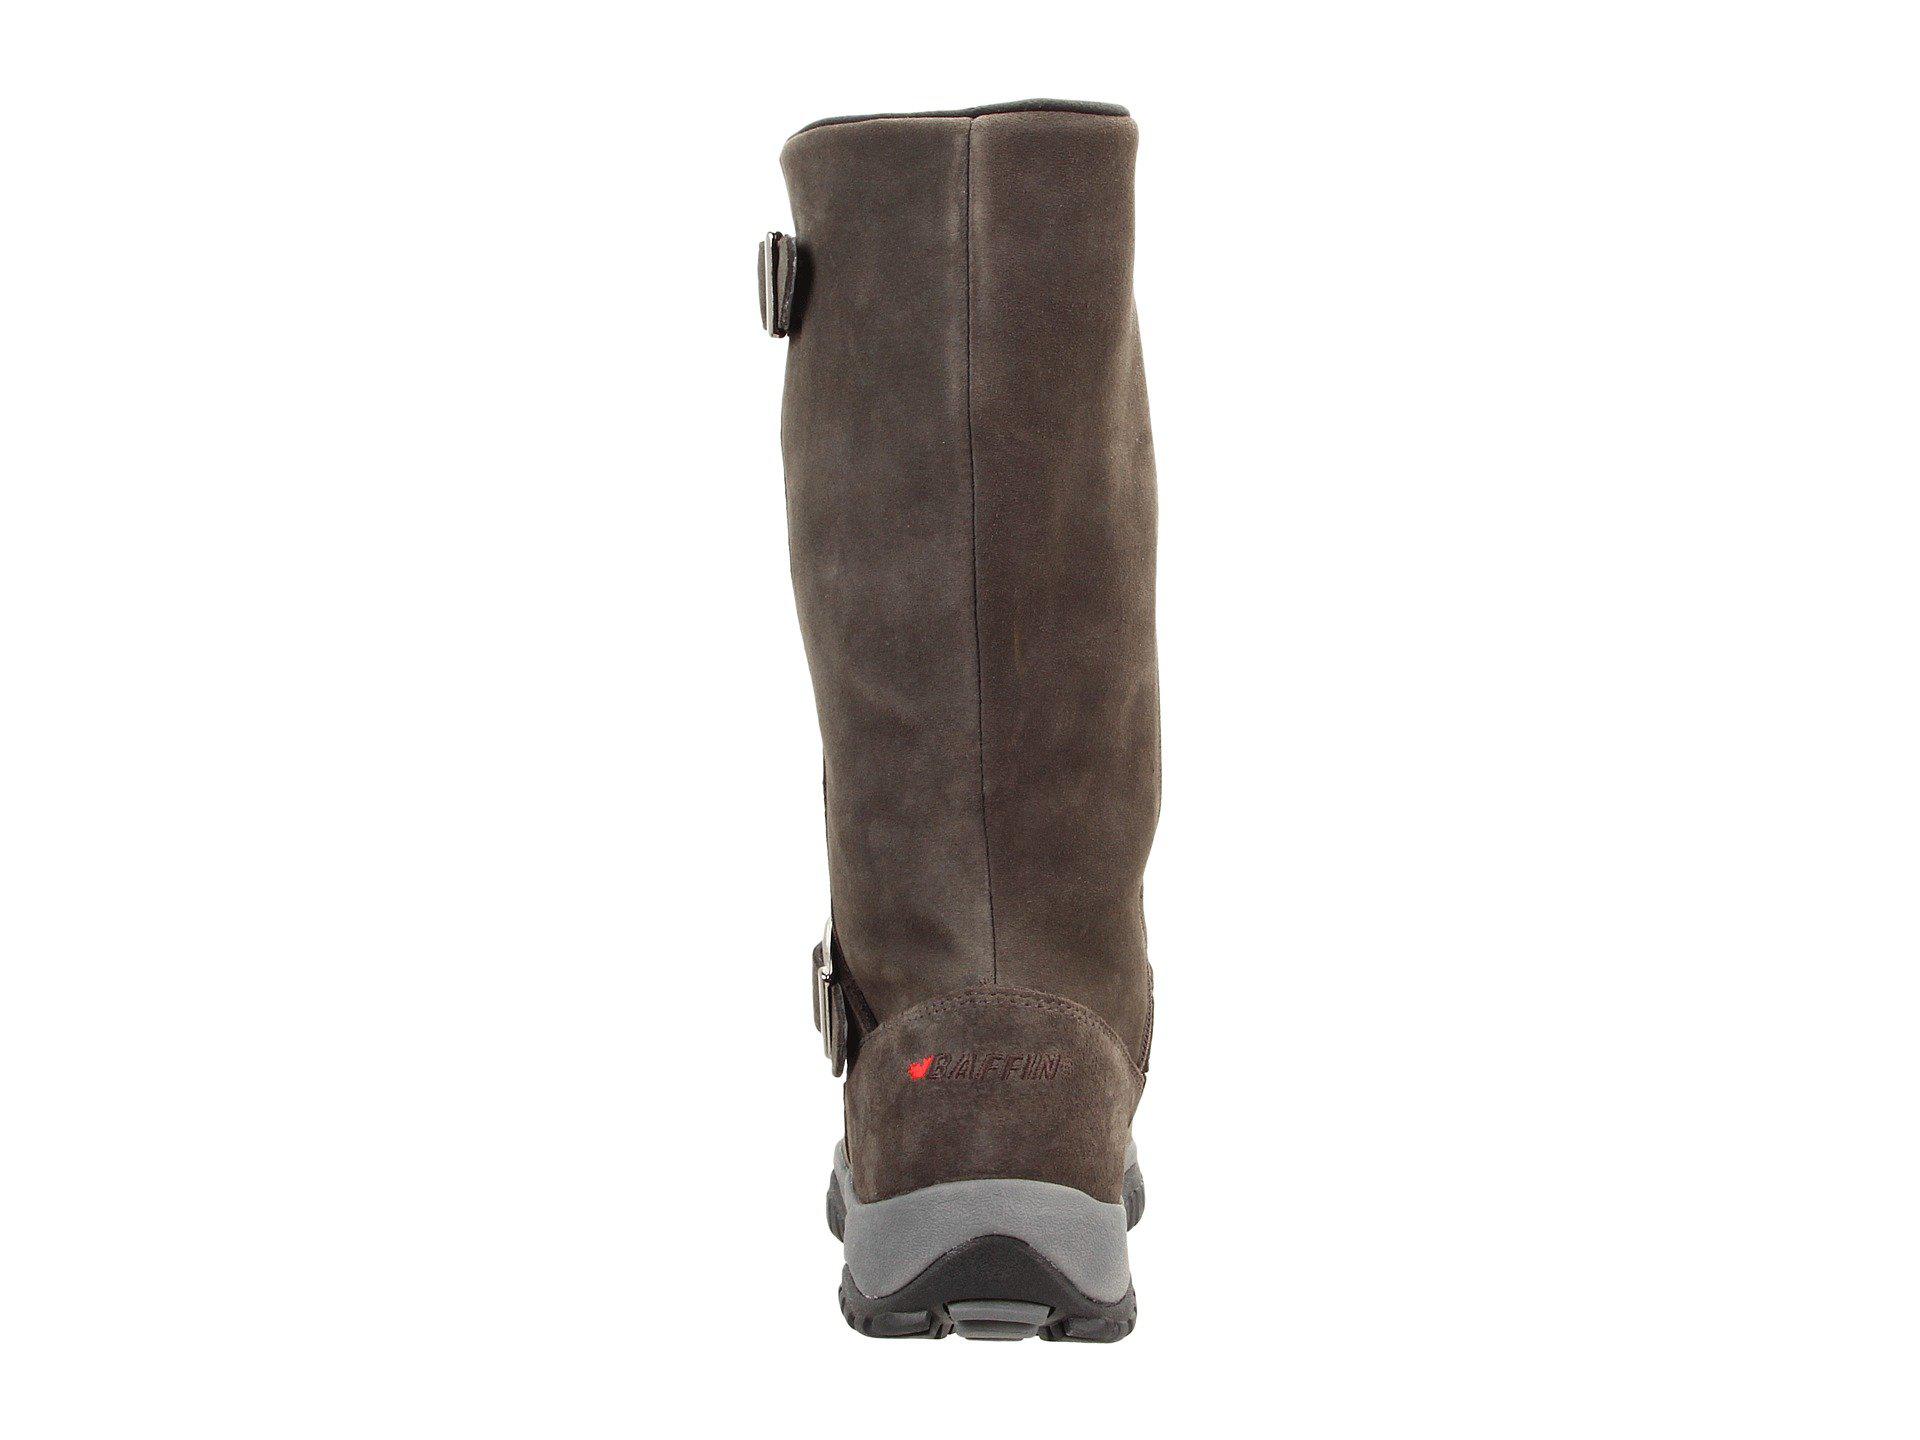 baffin charlee boots